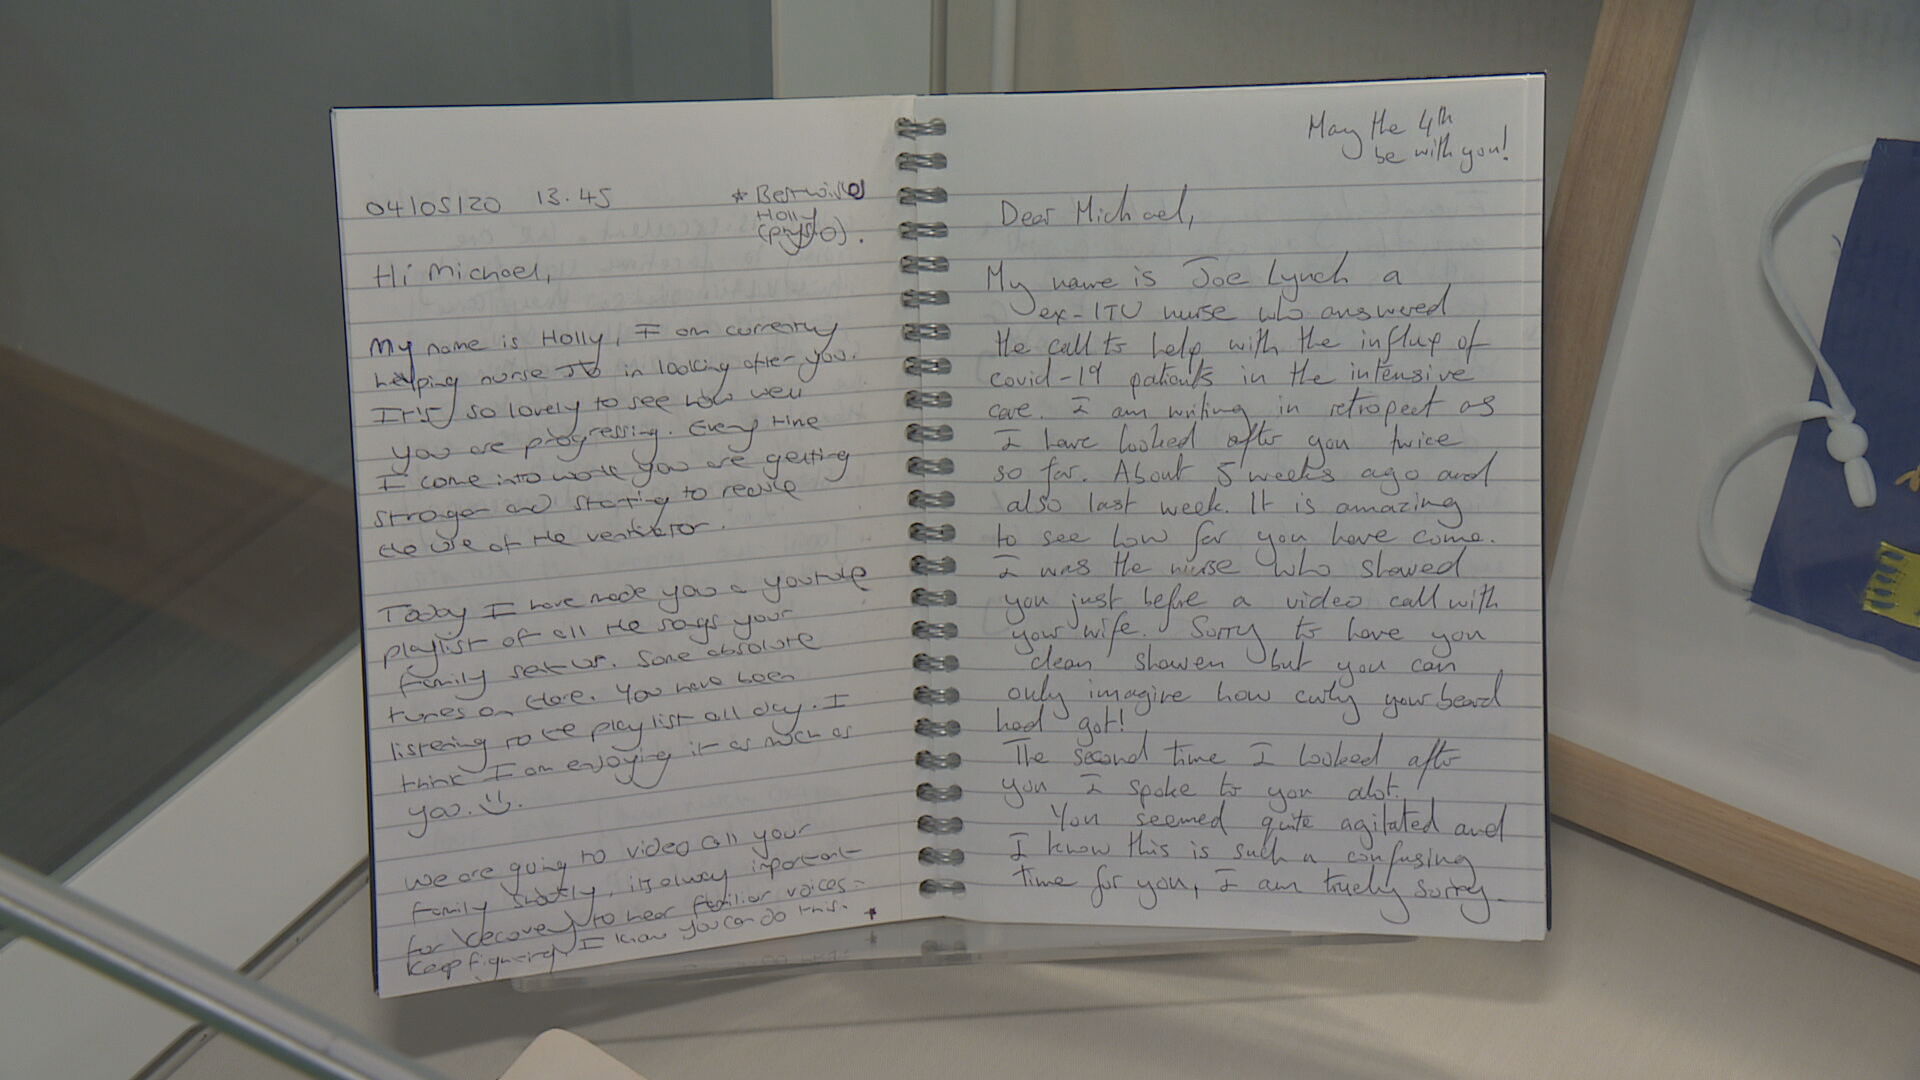 Michael Rosen's patient diaries that features in the exhibition.